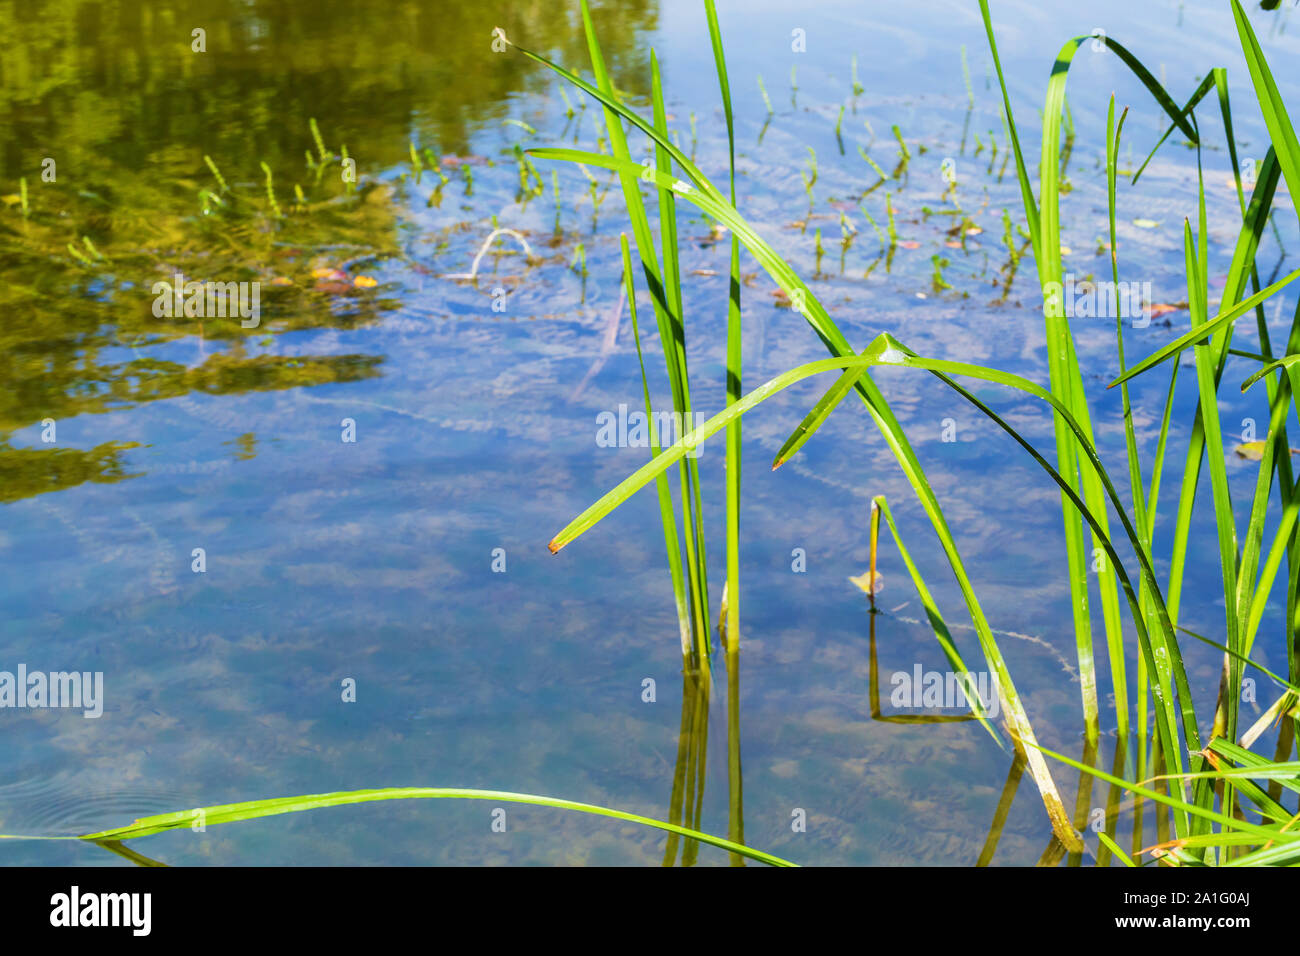 Nature landscape with lake and sedge grass on foreground Stock Photo